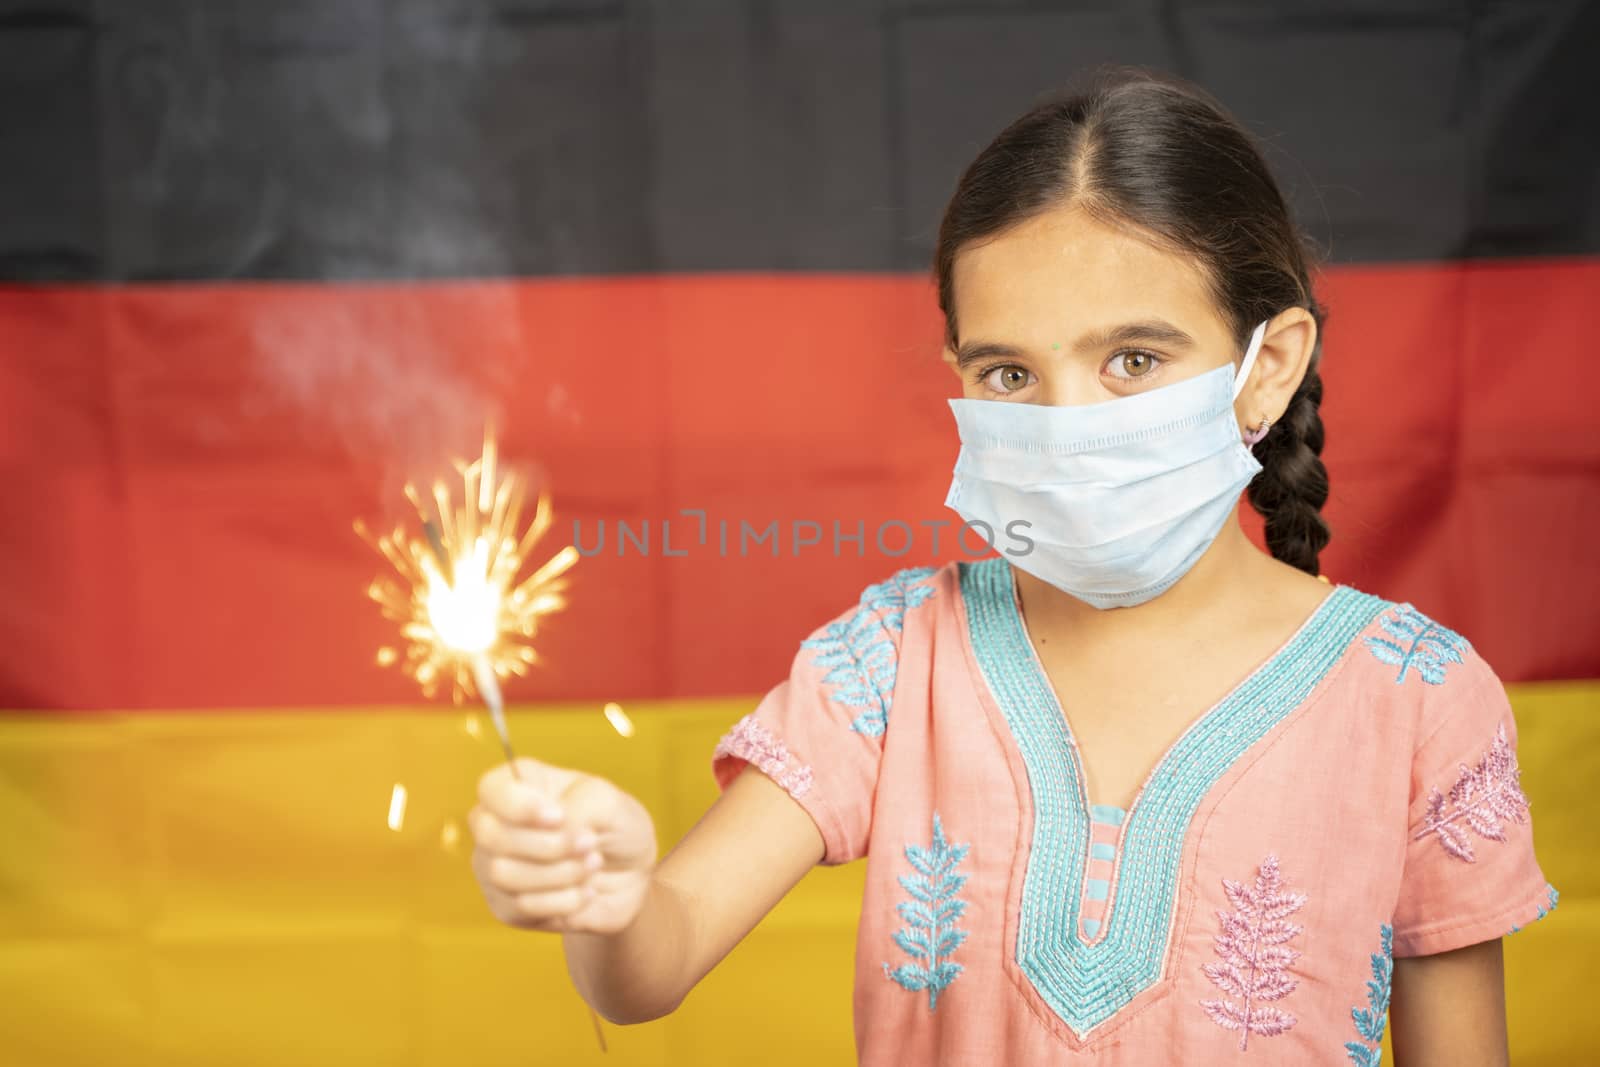 Young Girl Kid on medical mask holding Sparkler with german flag as background - concept showing Celebration of German Unity or Republic Day.